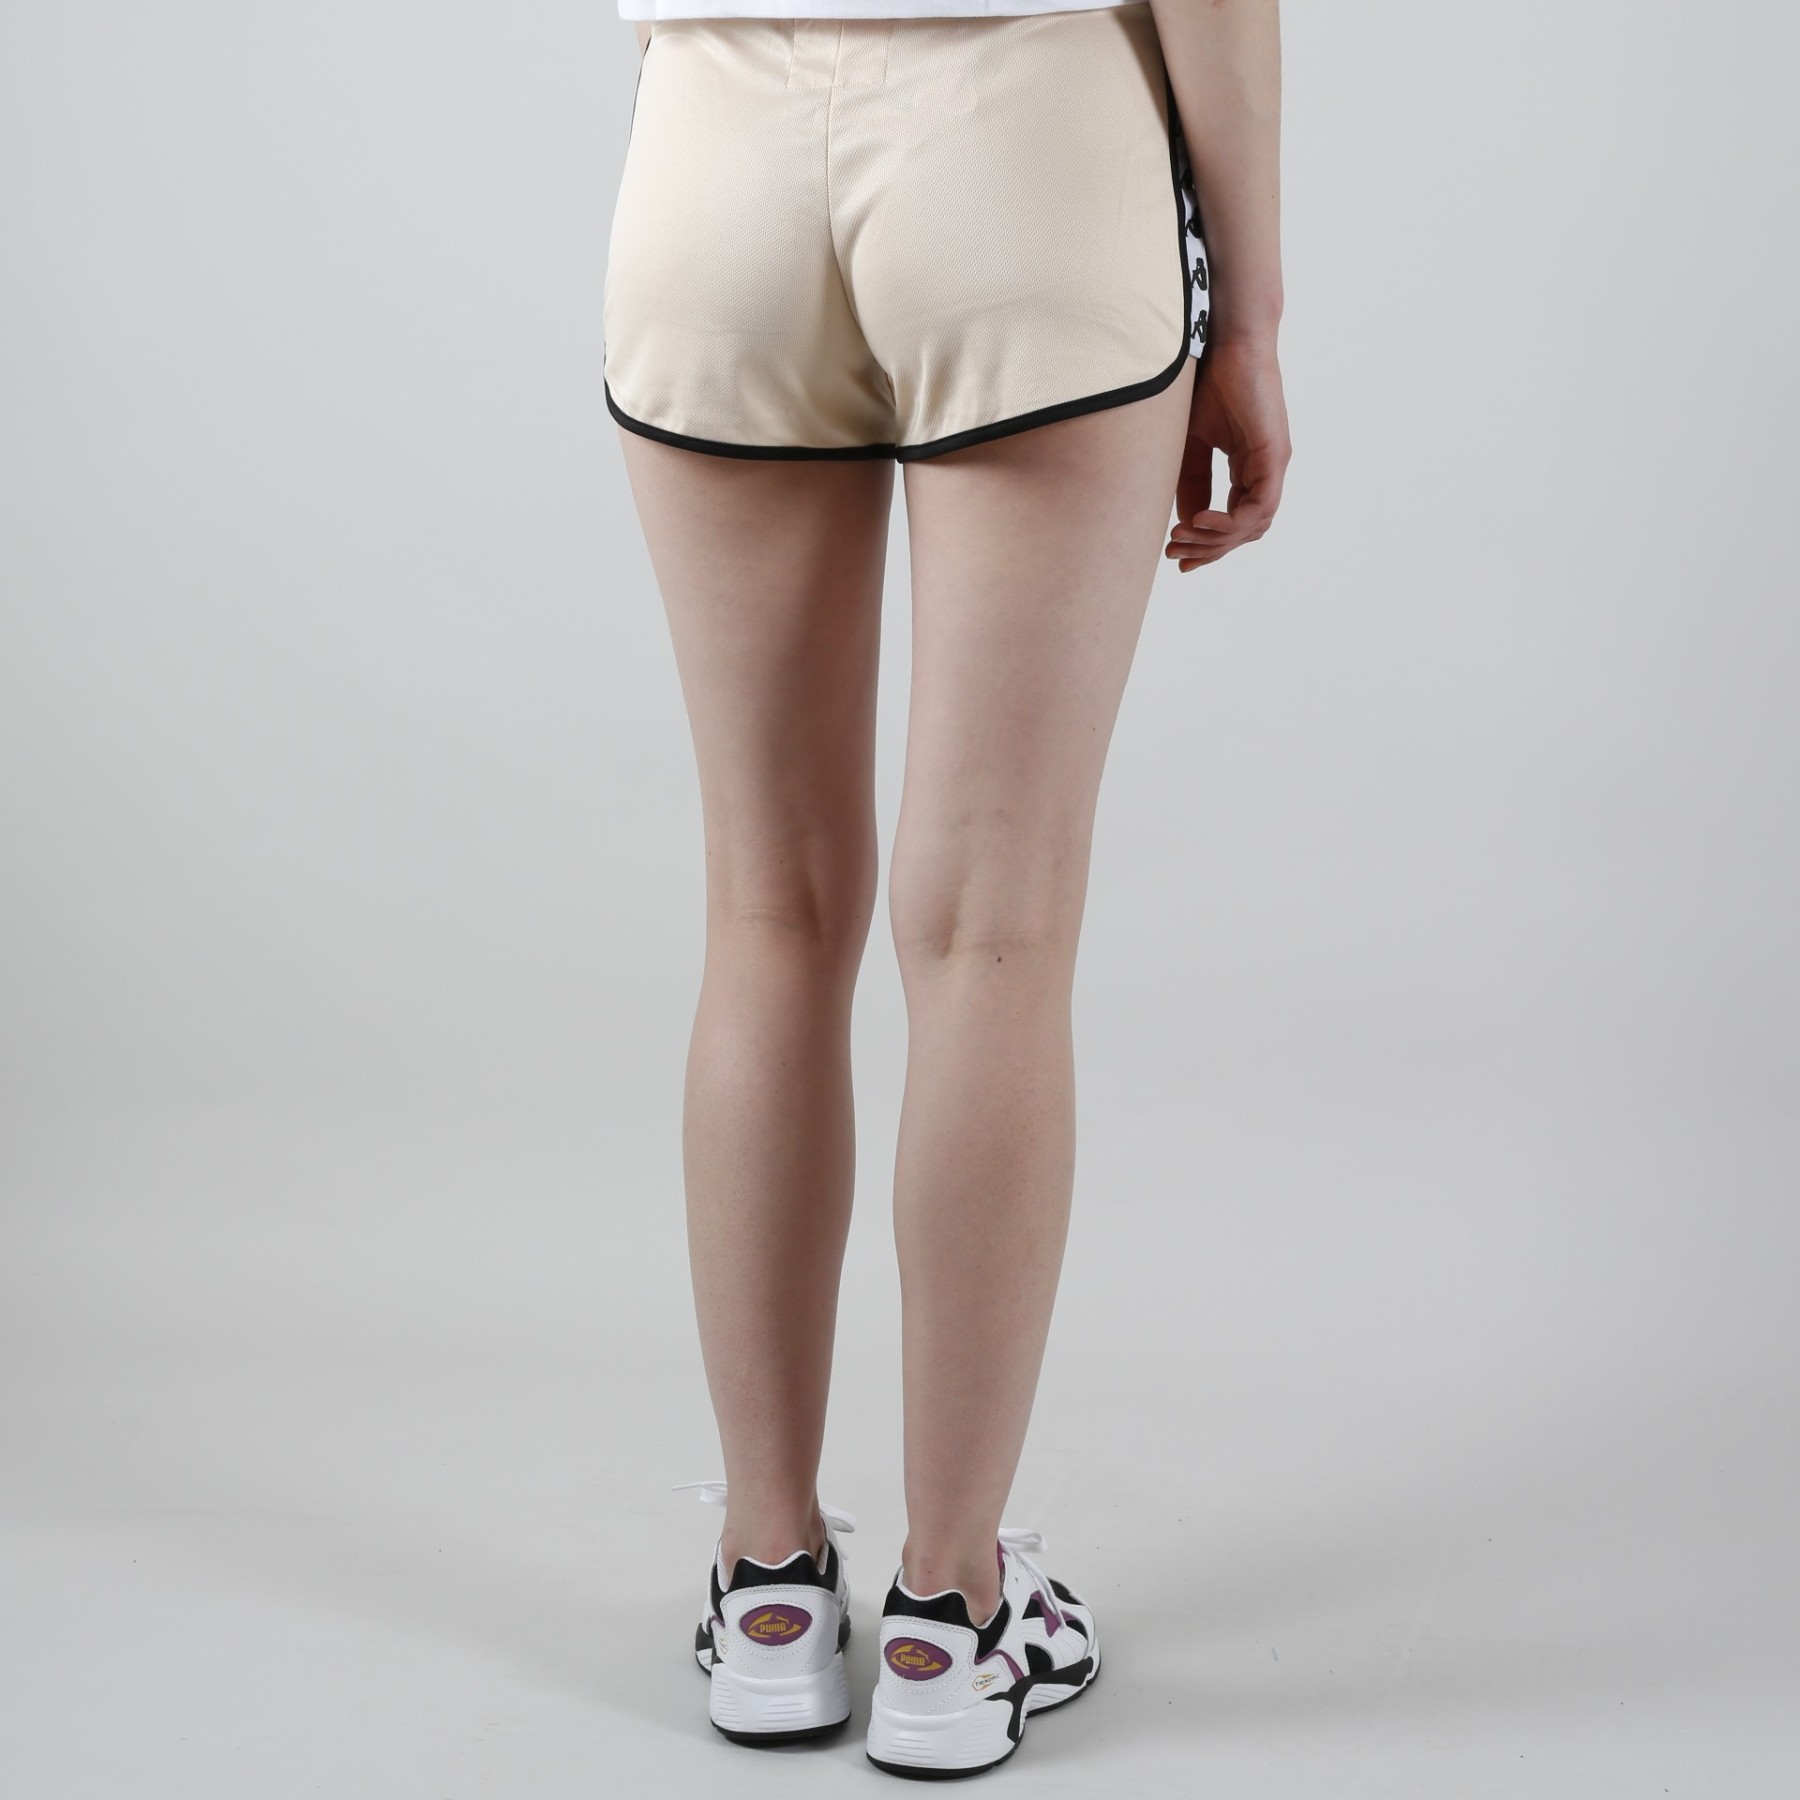 ANGUY AUTH SHORT